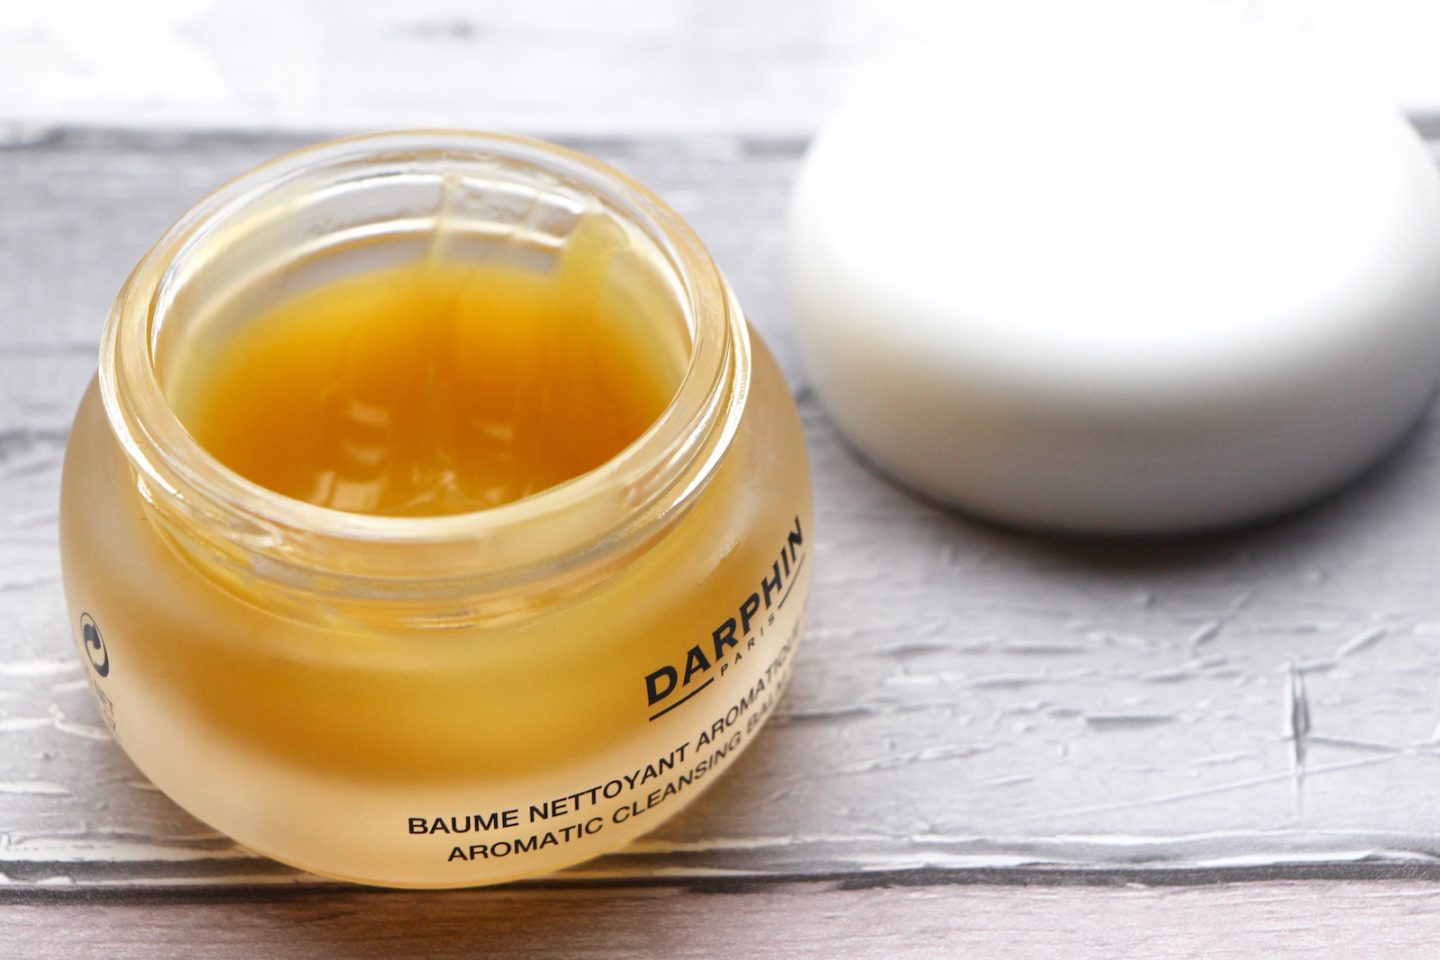 Darphin Aromatic Cleansing Balm Review